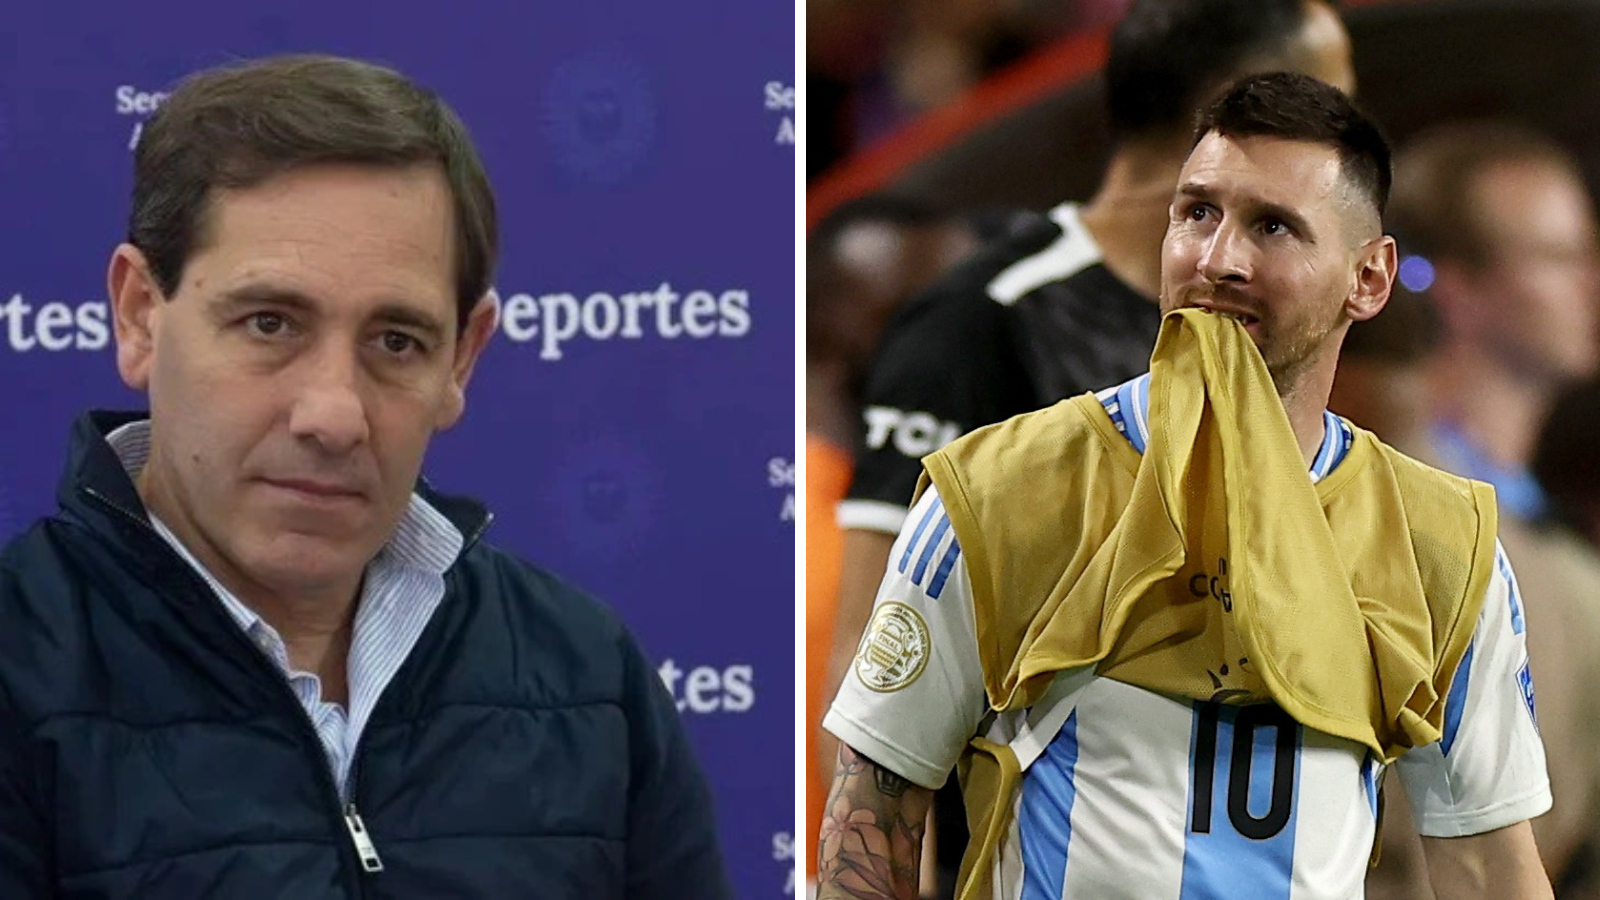 Julio Garro was fired from his position as Undersecretary of Sports by the Argentina President's office on Thursday for demanding an apology from Lionel Messi. (X/AP)